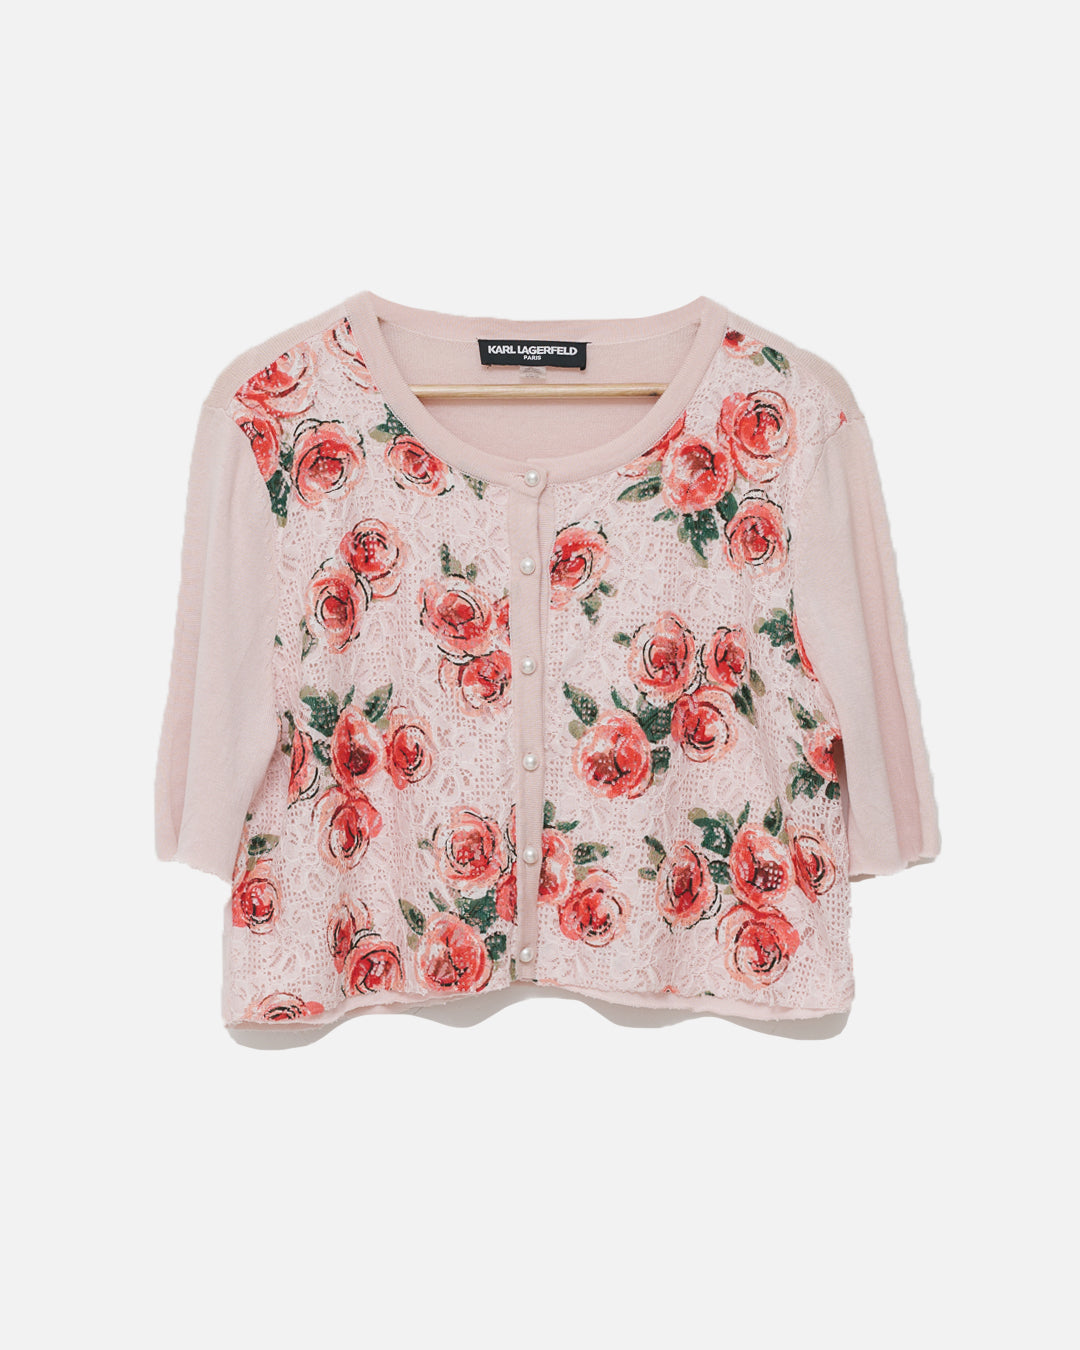 Karl Lagerfeld Embroidered Top